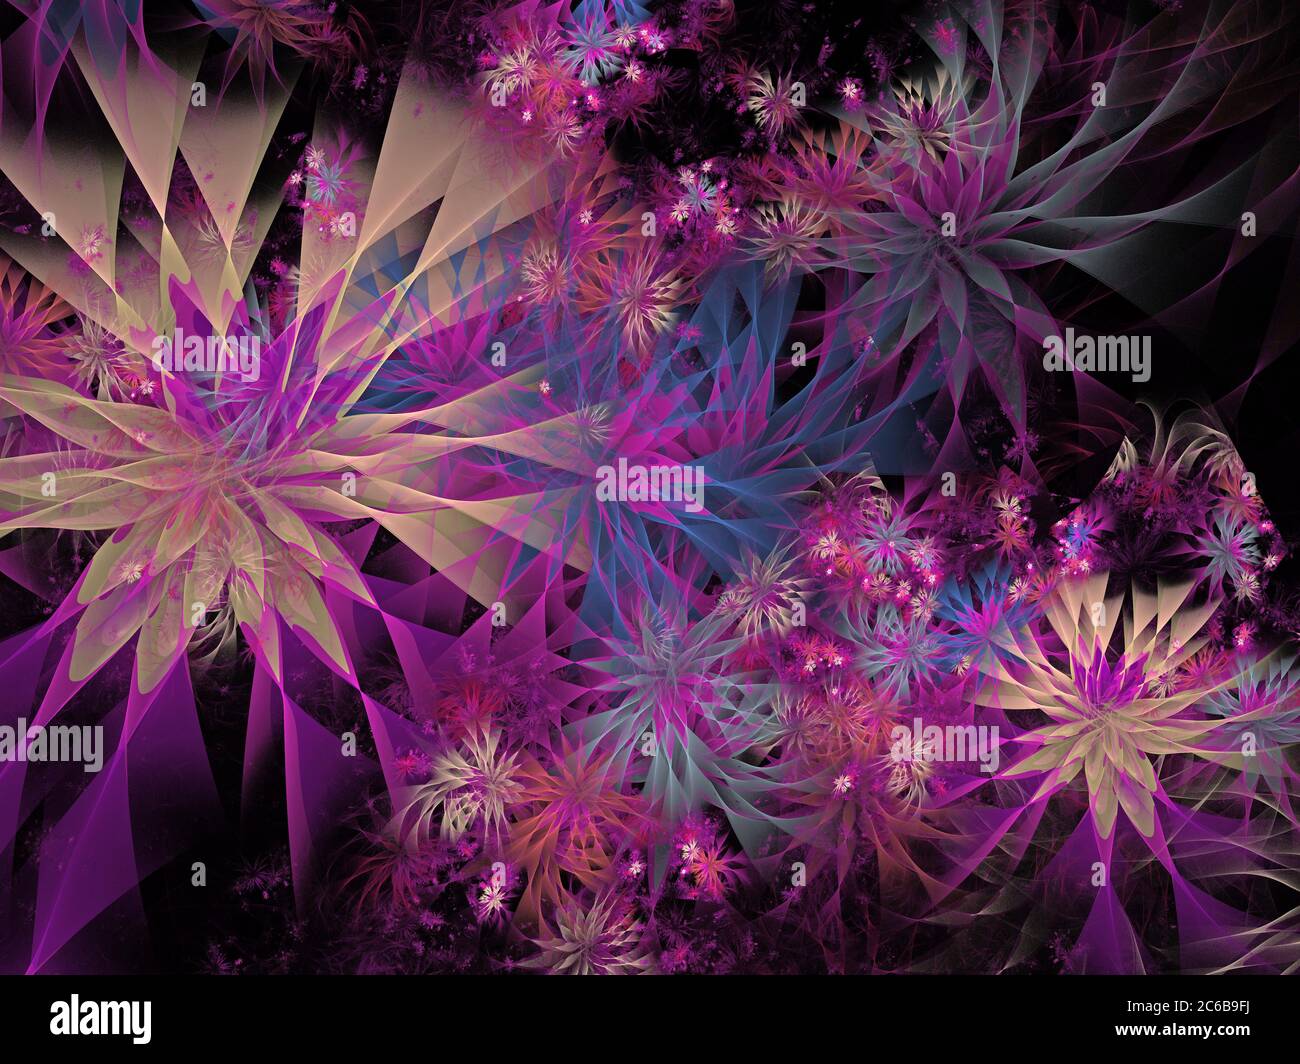 Flame Fractal  - Flowers Design Stock Photo